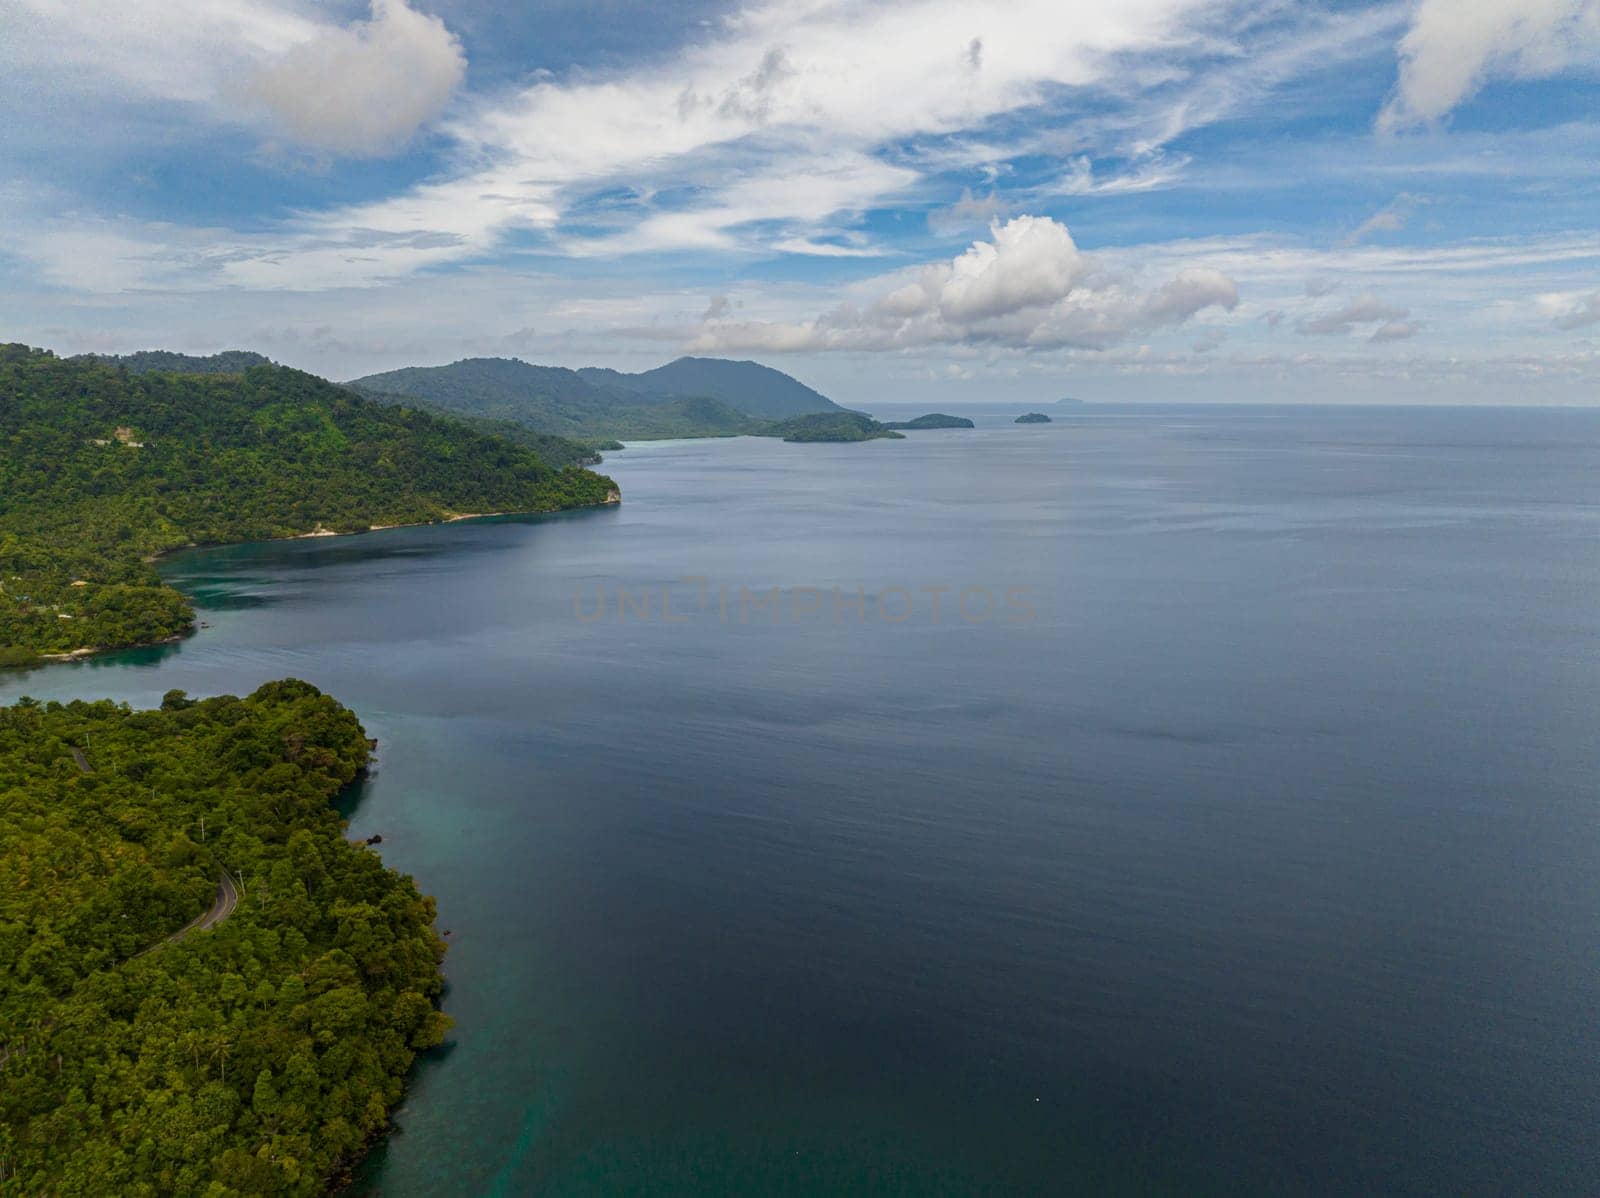 Coast of Weh island with rainforest and jungle. Aceh, Indonesia.